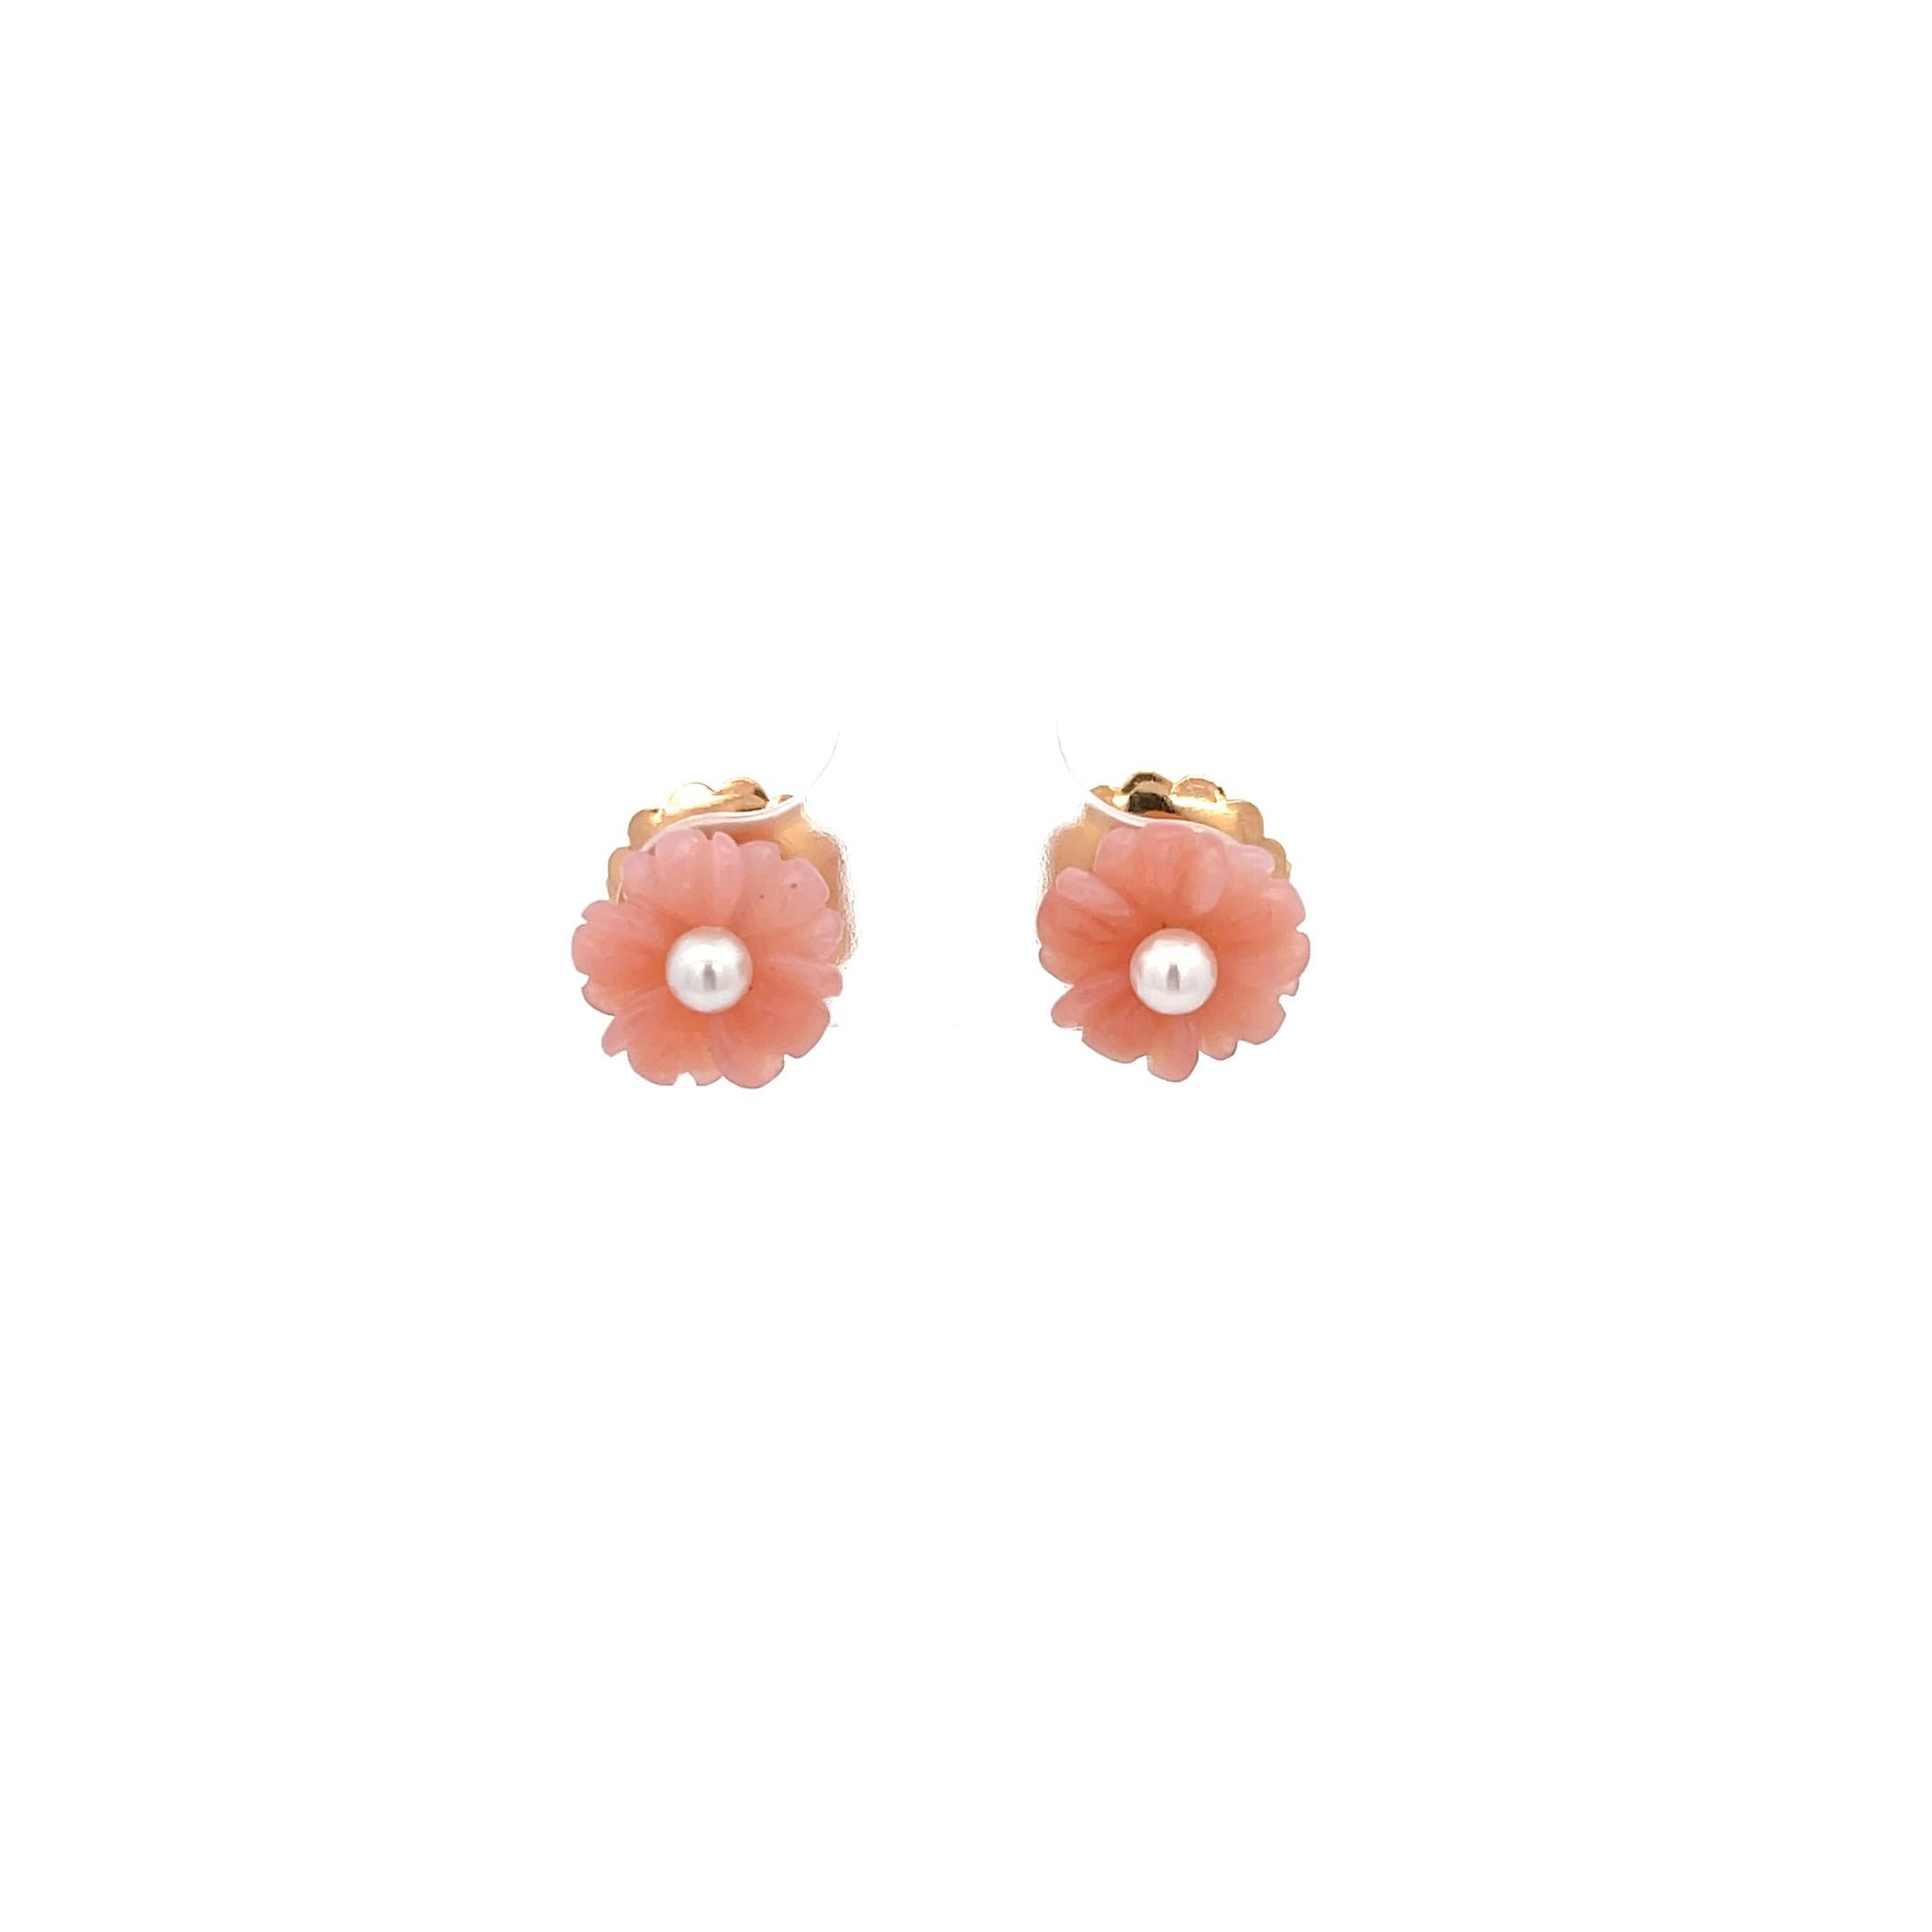 Contemporary Irene Neuwirth Pink Opal Akoya Pearl Earrings 18k Rose Gold For Sale